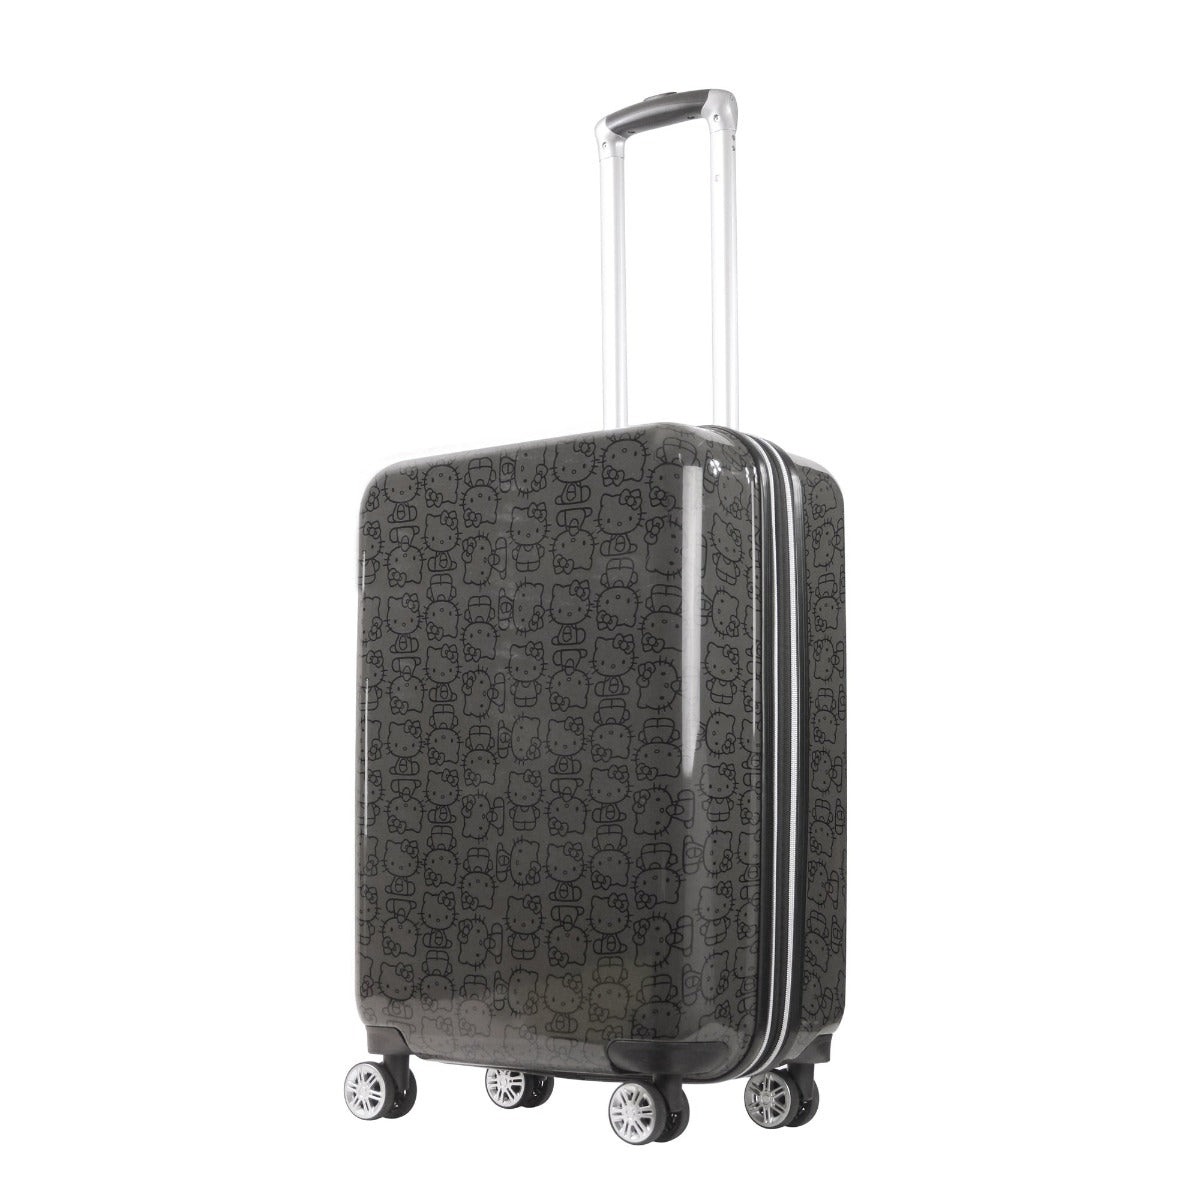 Hello Kitty Pose All Over Print 25.5" Hardsided Checked Luggage Black Spinner suitcase